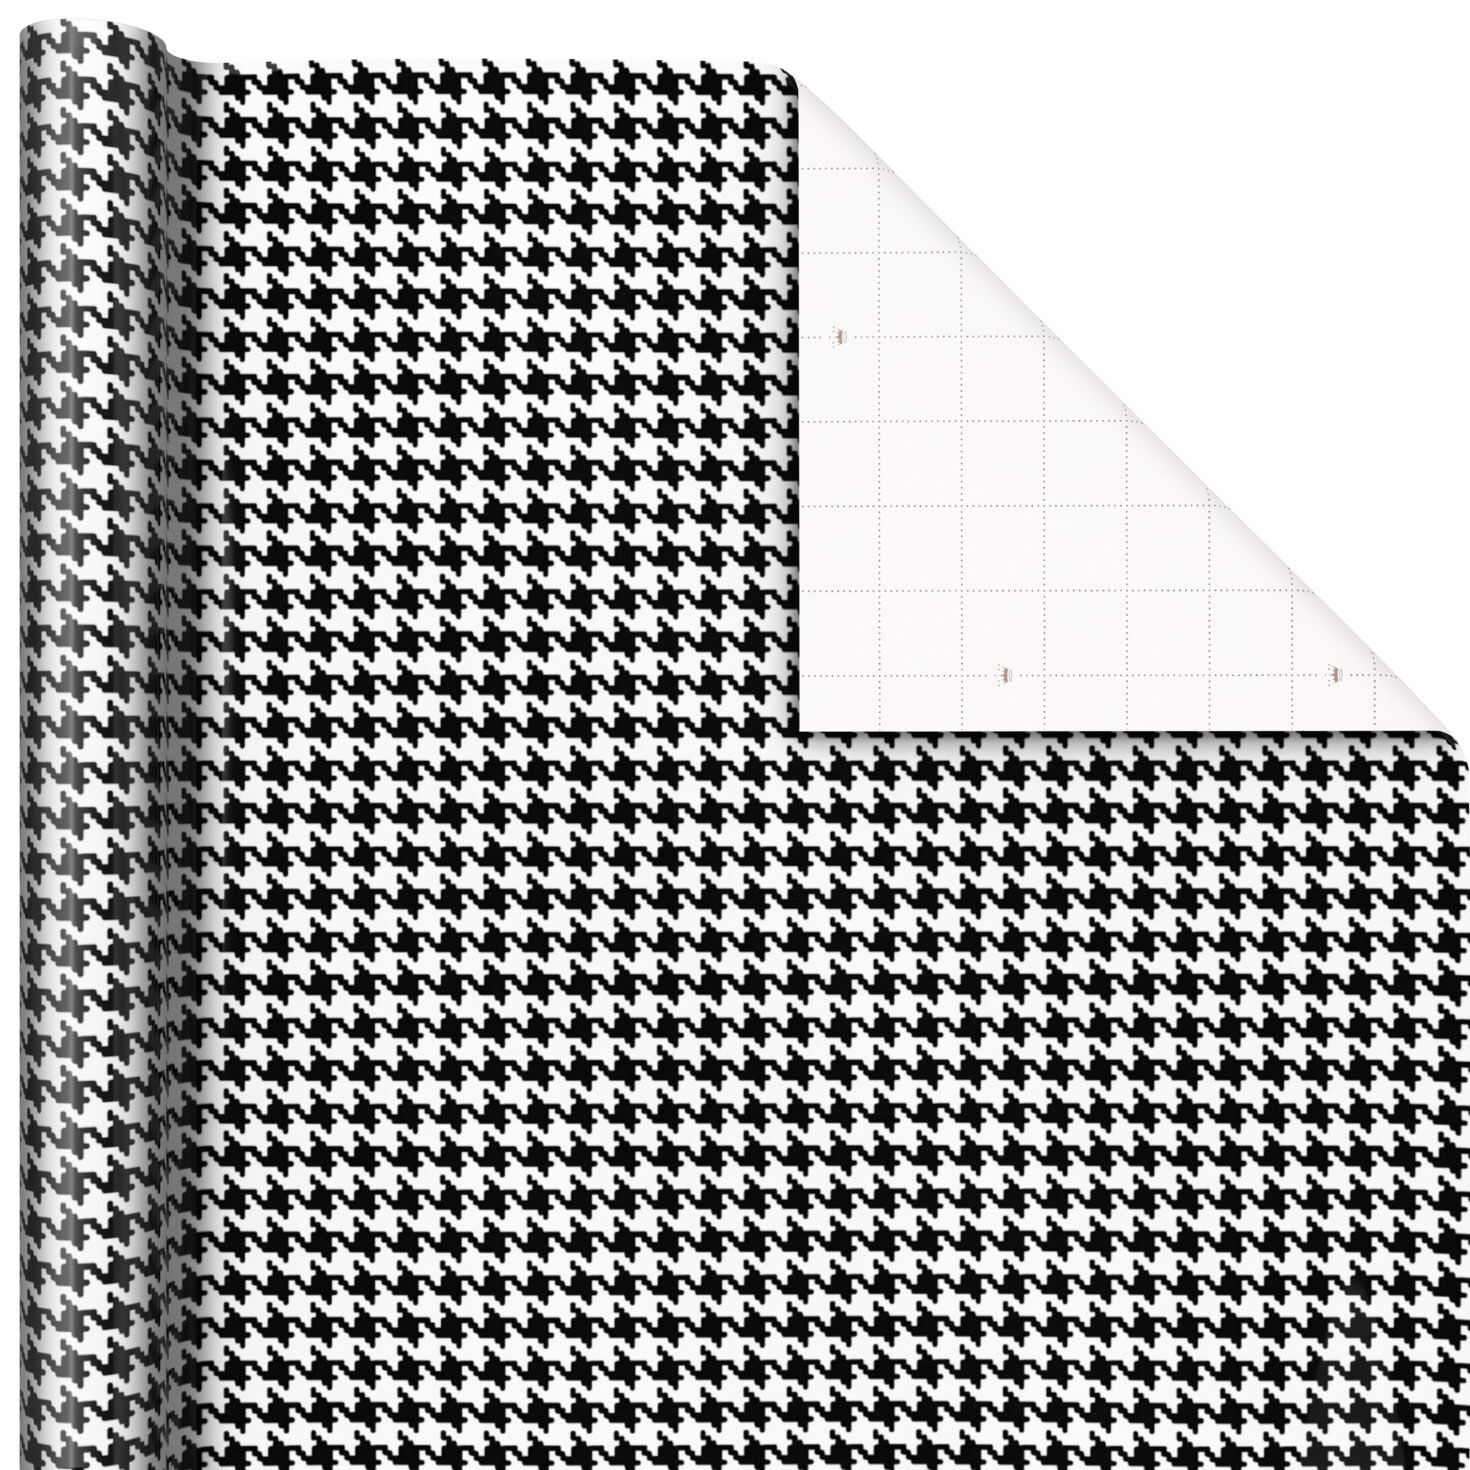 Hallmark Black and White Houndstooth Pattern Wrapping Paper, 20 Sq. ft.